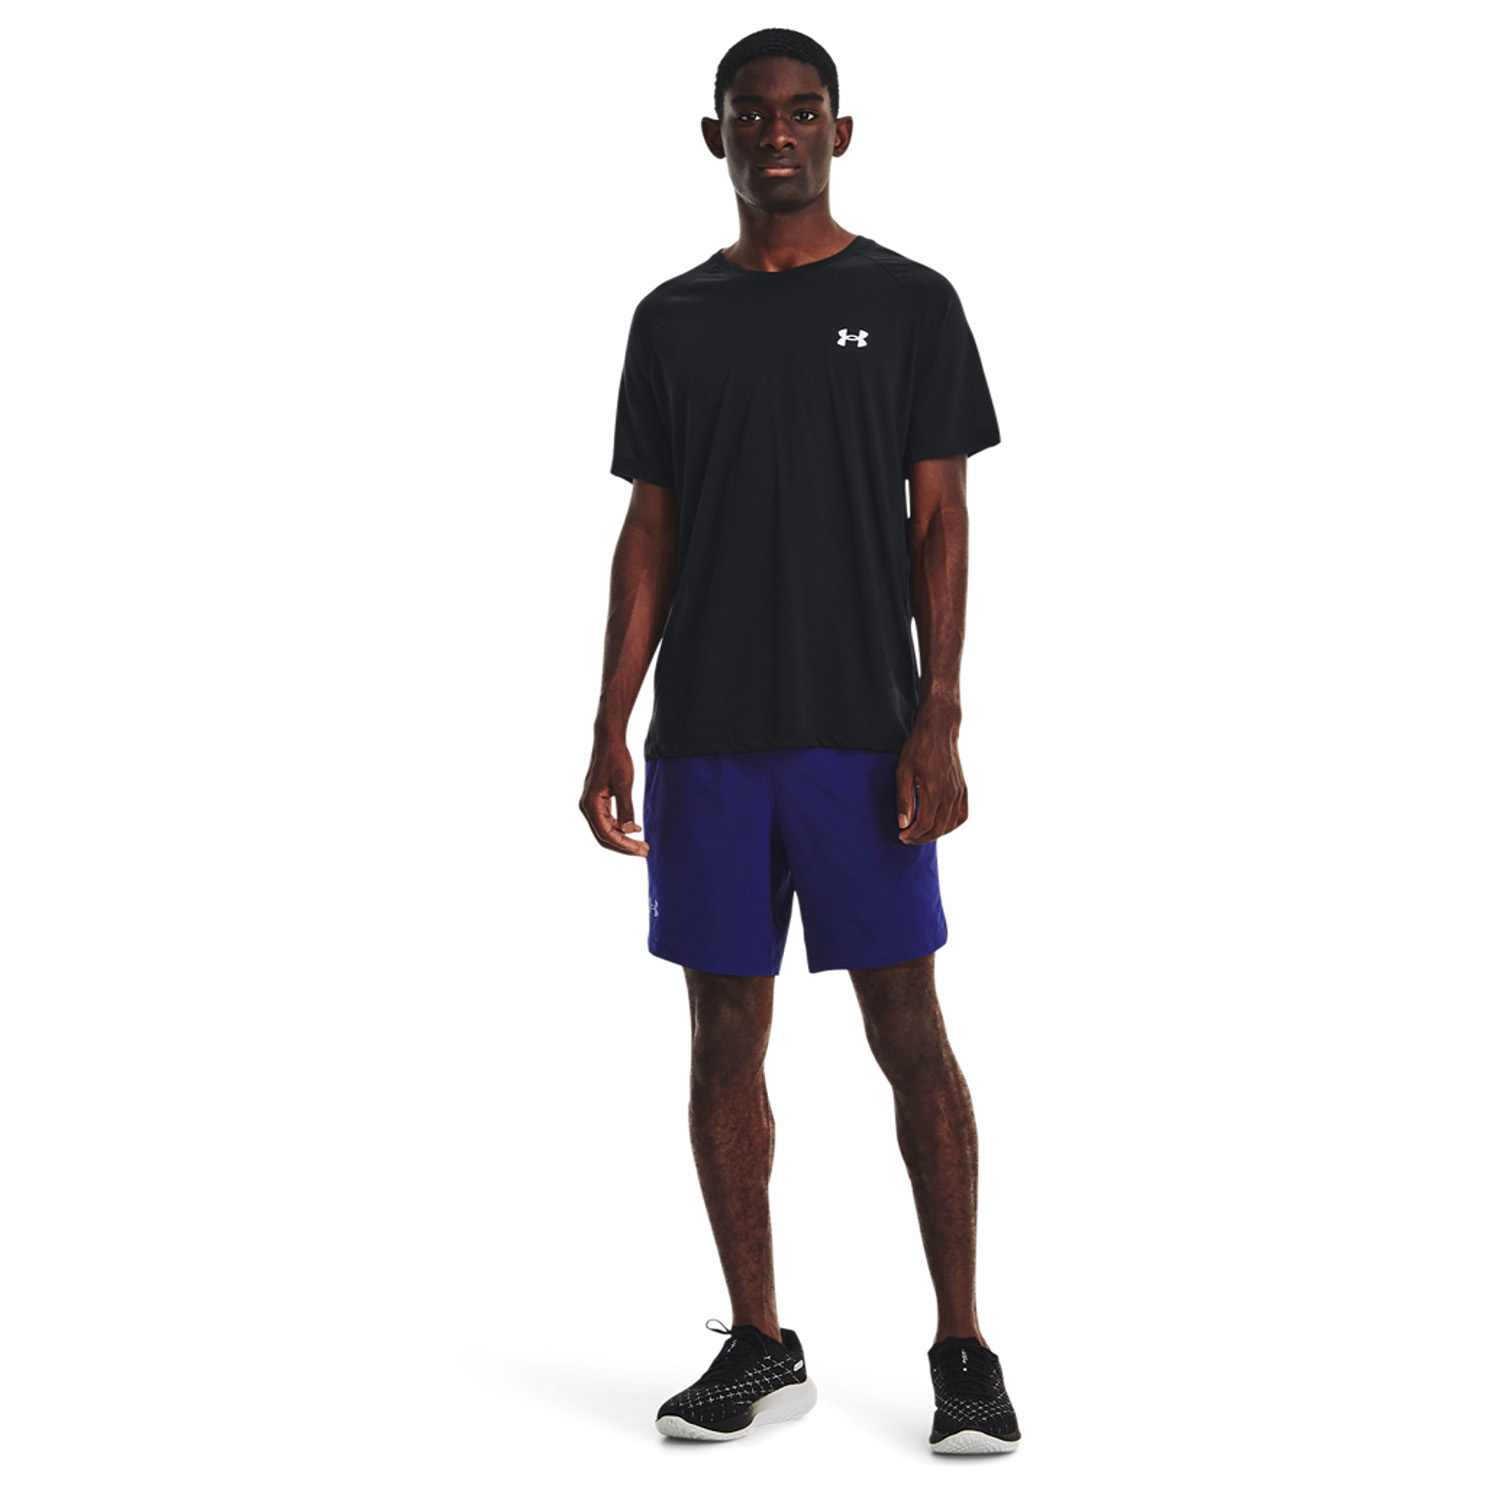 Under Armour Launch 2 in 1 7in Shorts - Sonar Blue/Black/Reflective